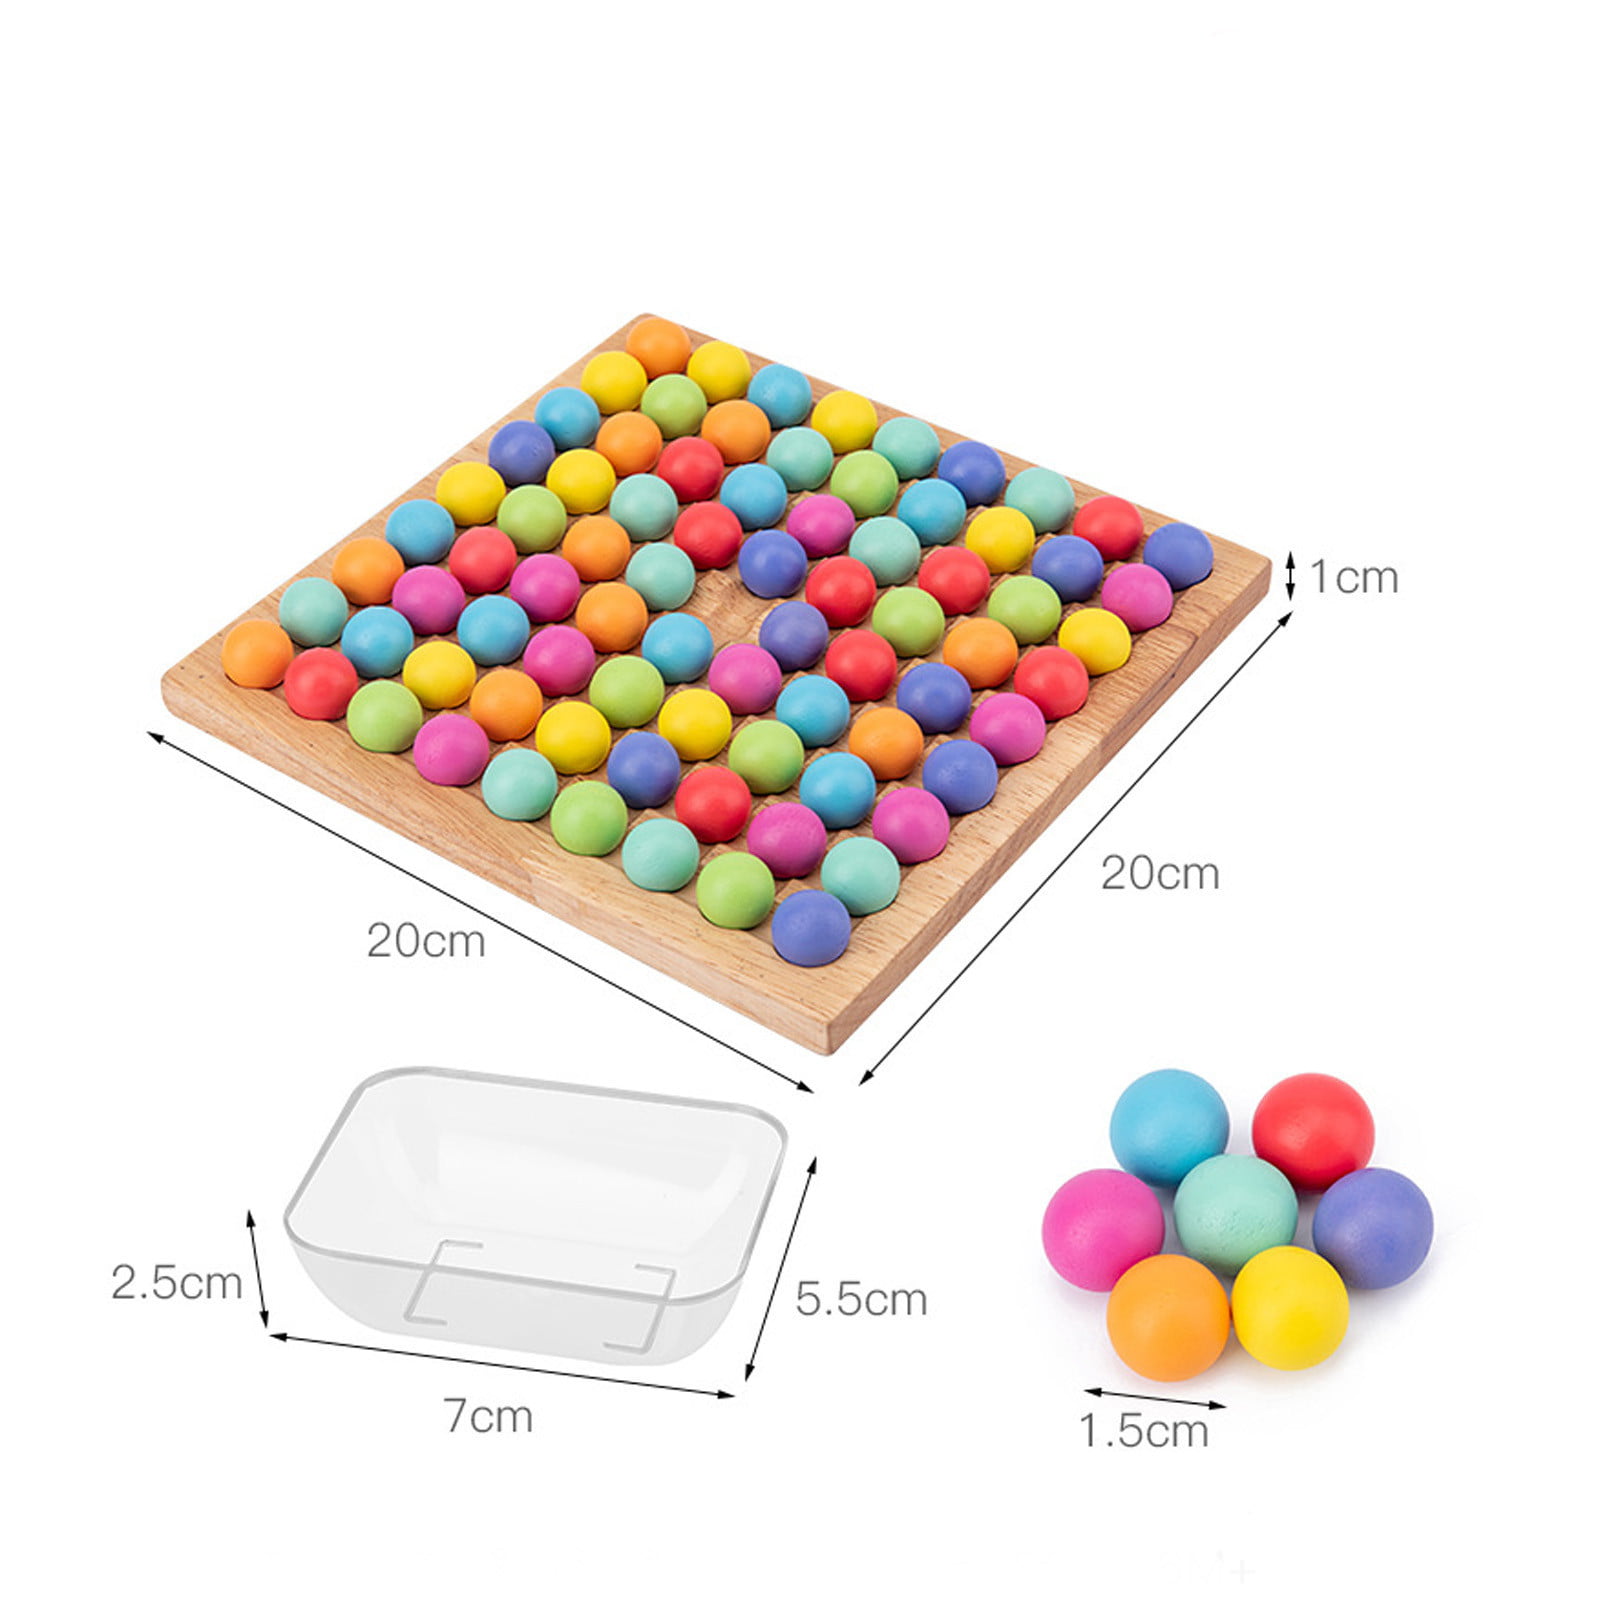 50 Pieces of Challenge Cards Funny Expression Puzzle Colorful for Kids Logical Thinking WANGYUMI Wooden Blocks Board Game